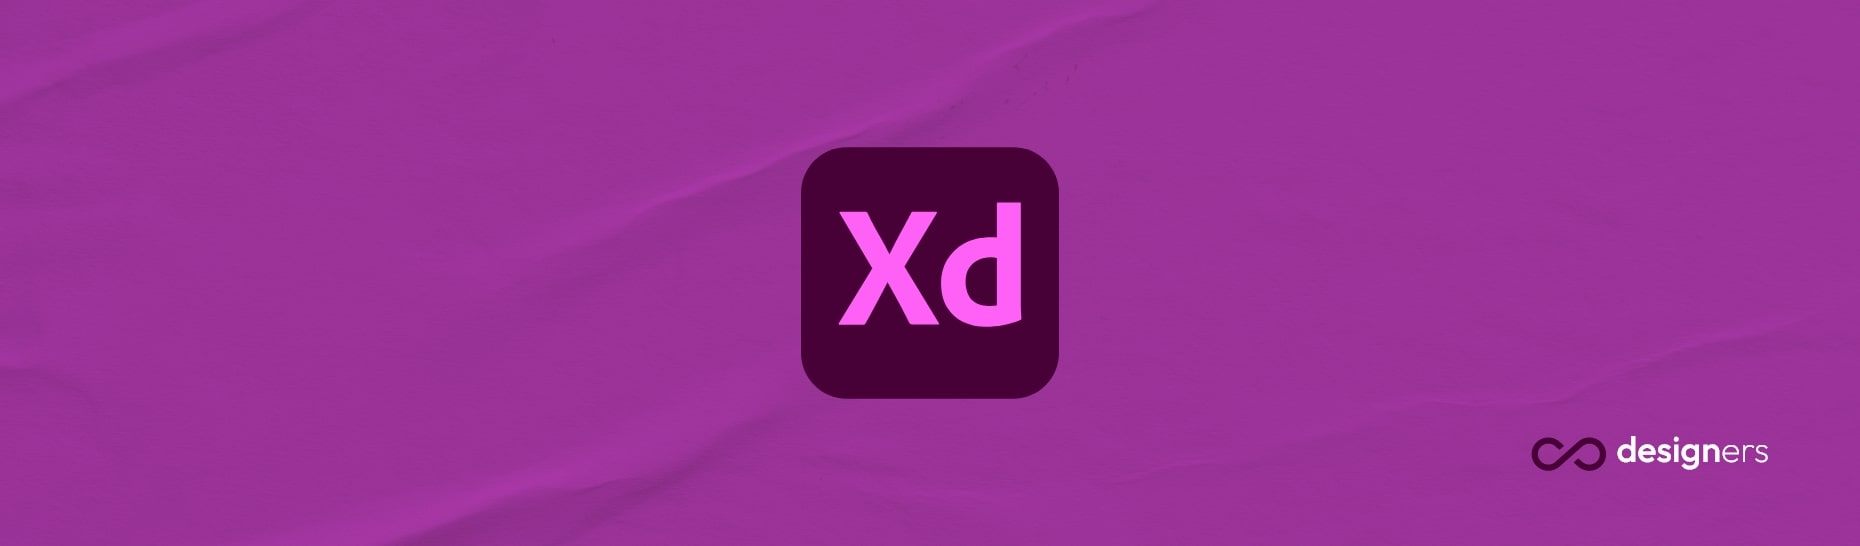 6 Adobe XD plugins to test designs and get user feedback